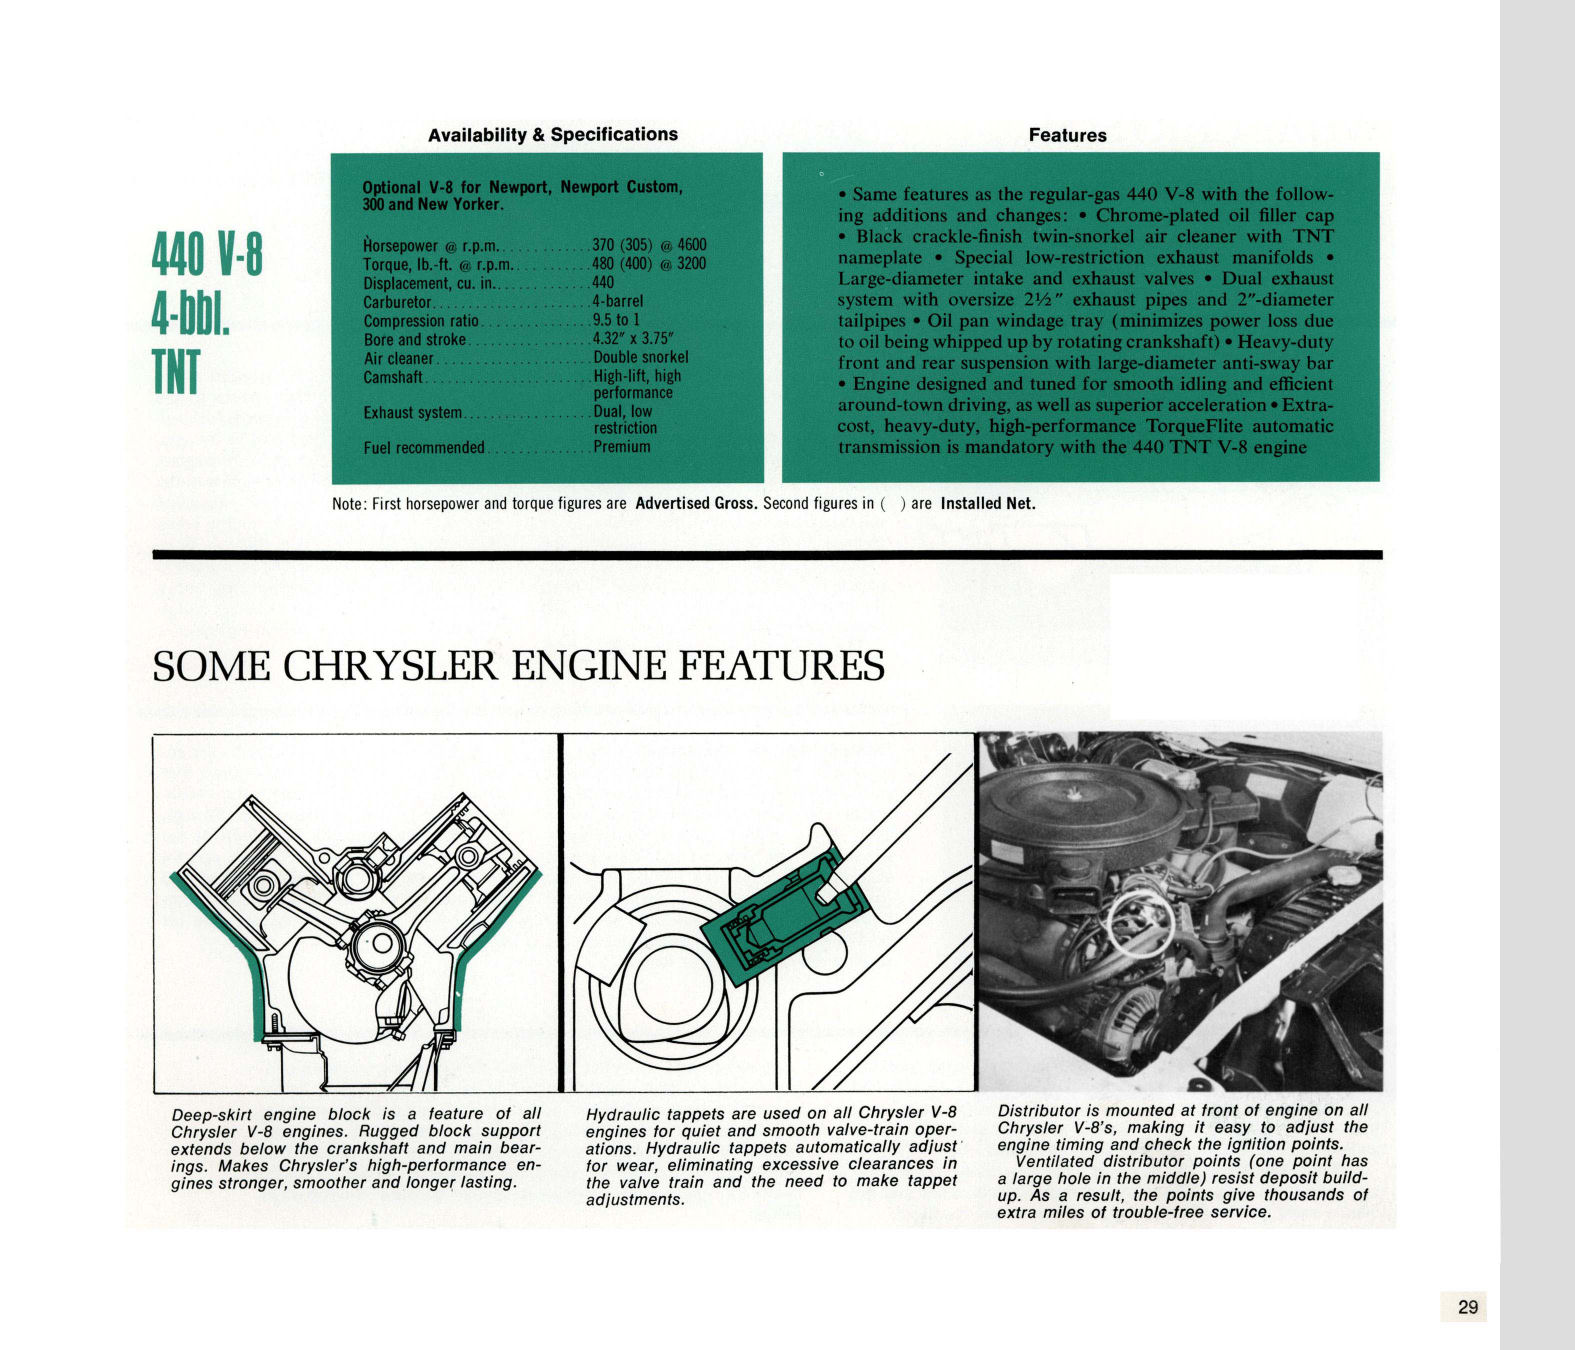 1971 Chrysler Features Brochure Page 11